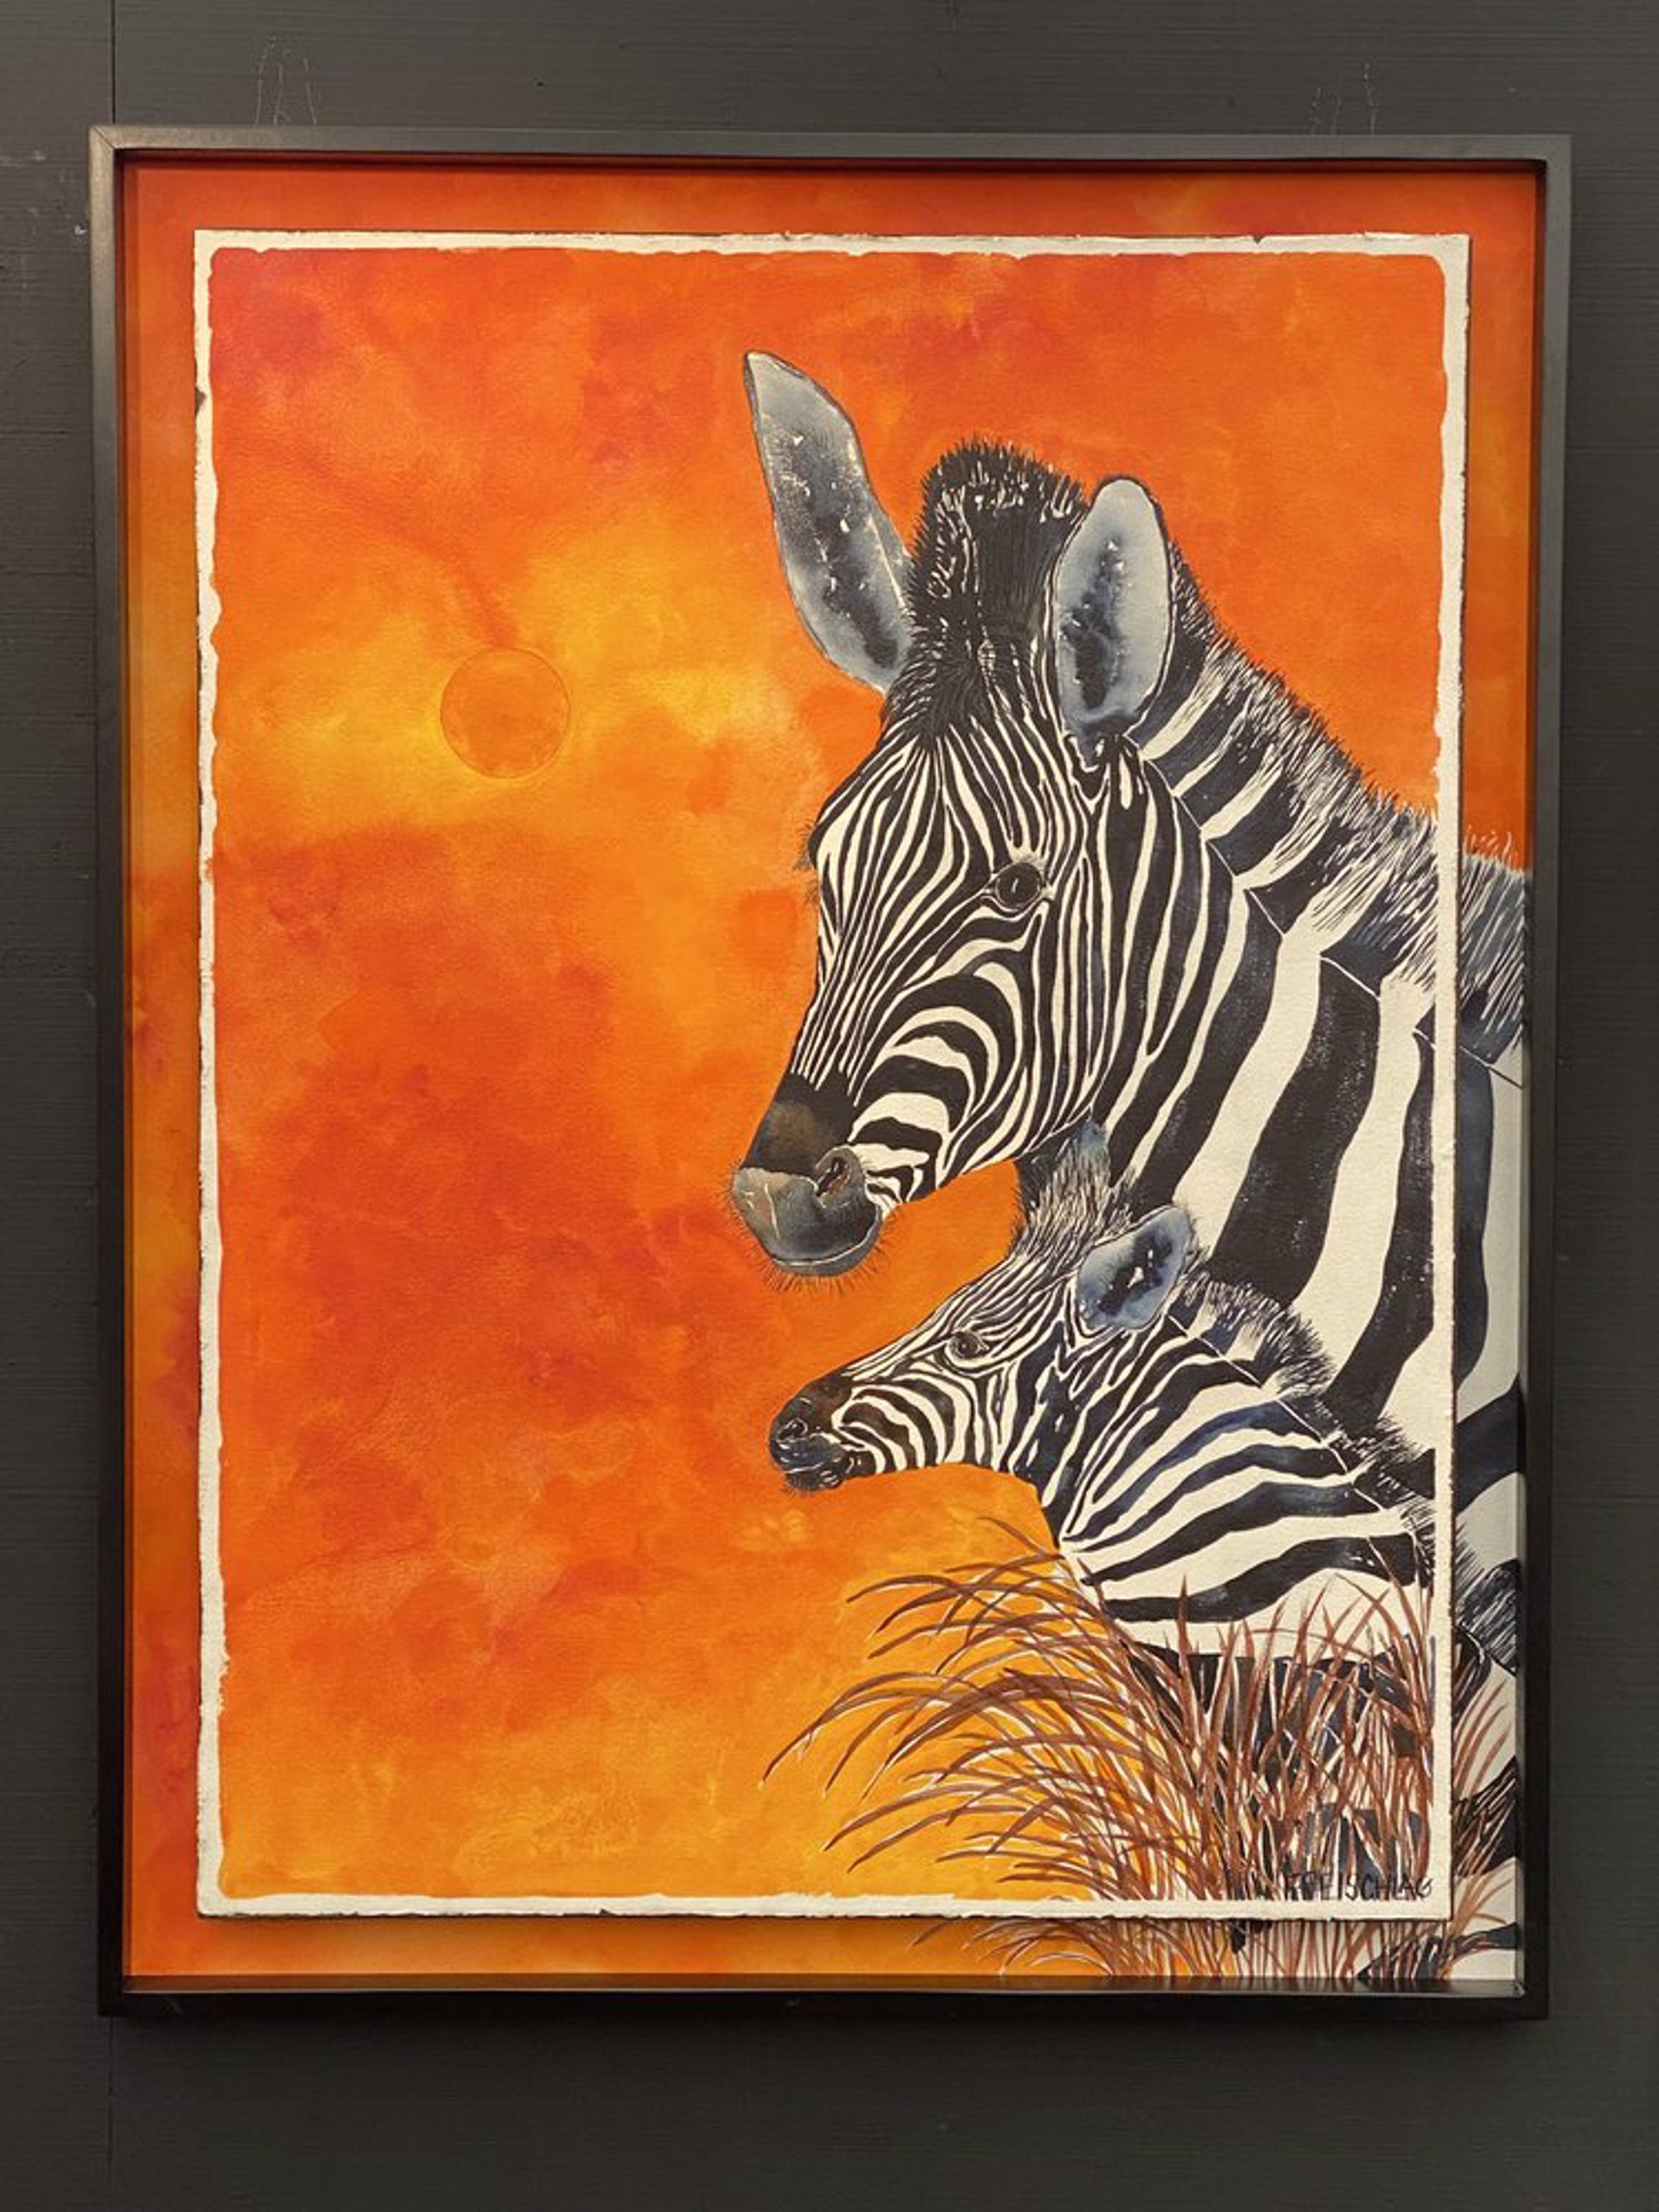 The Color of Zebra by Peter Freischlag